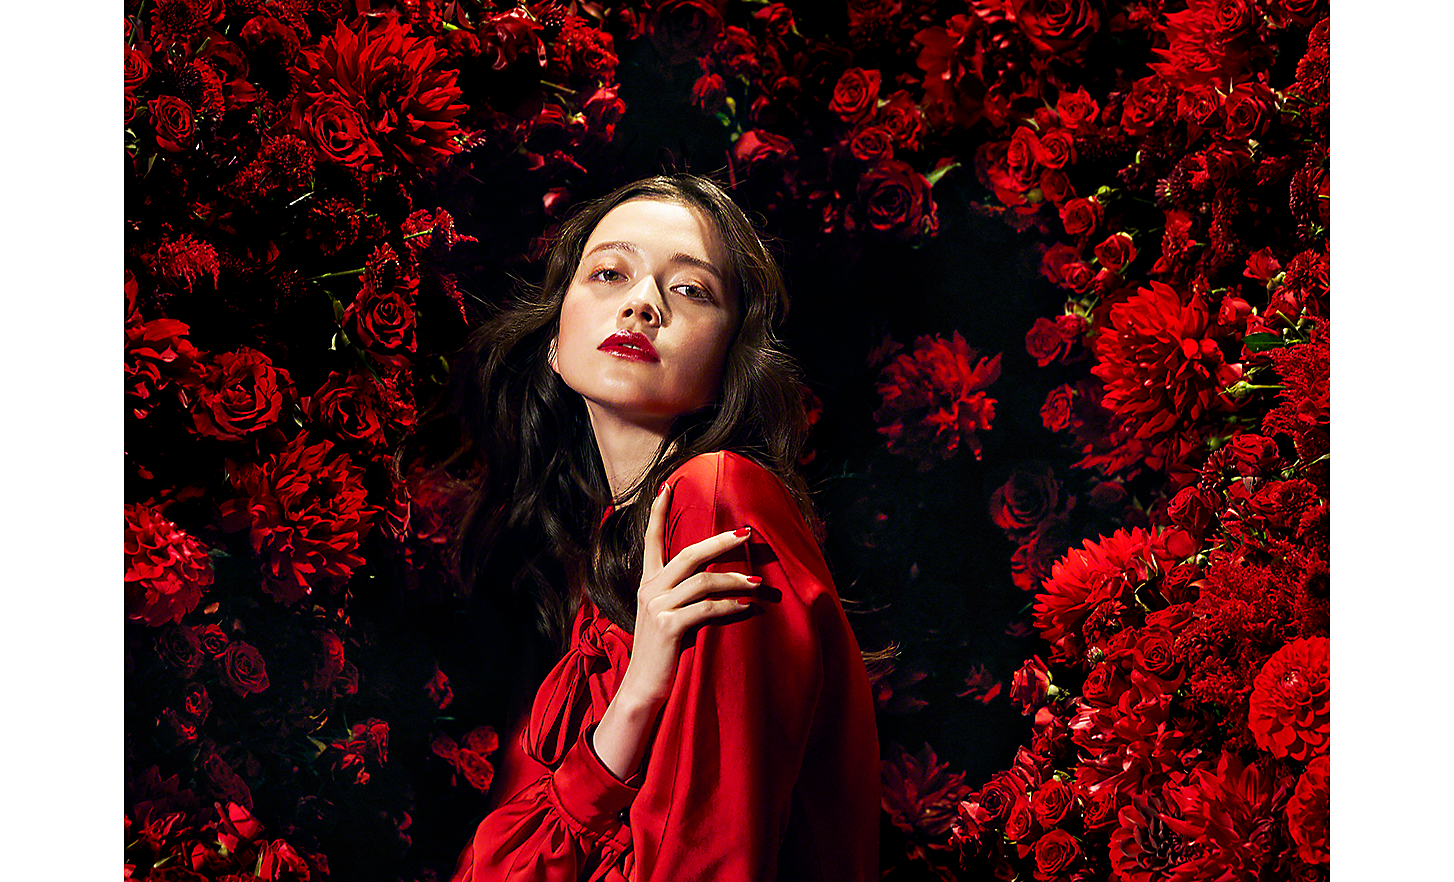 125mm shot of a woman dressed in red surrounded by red flowers